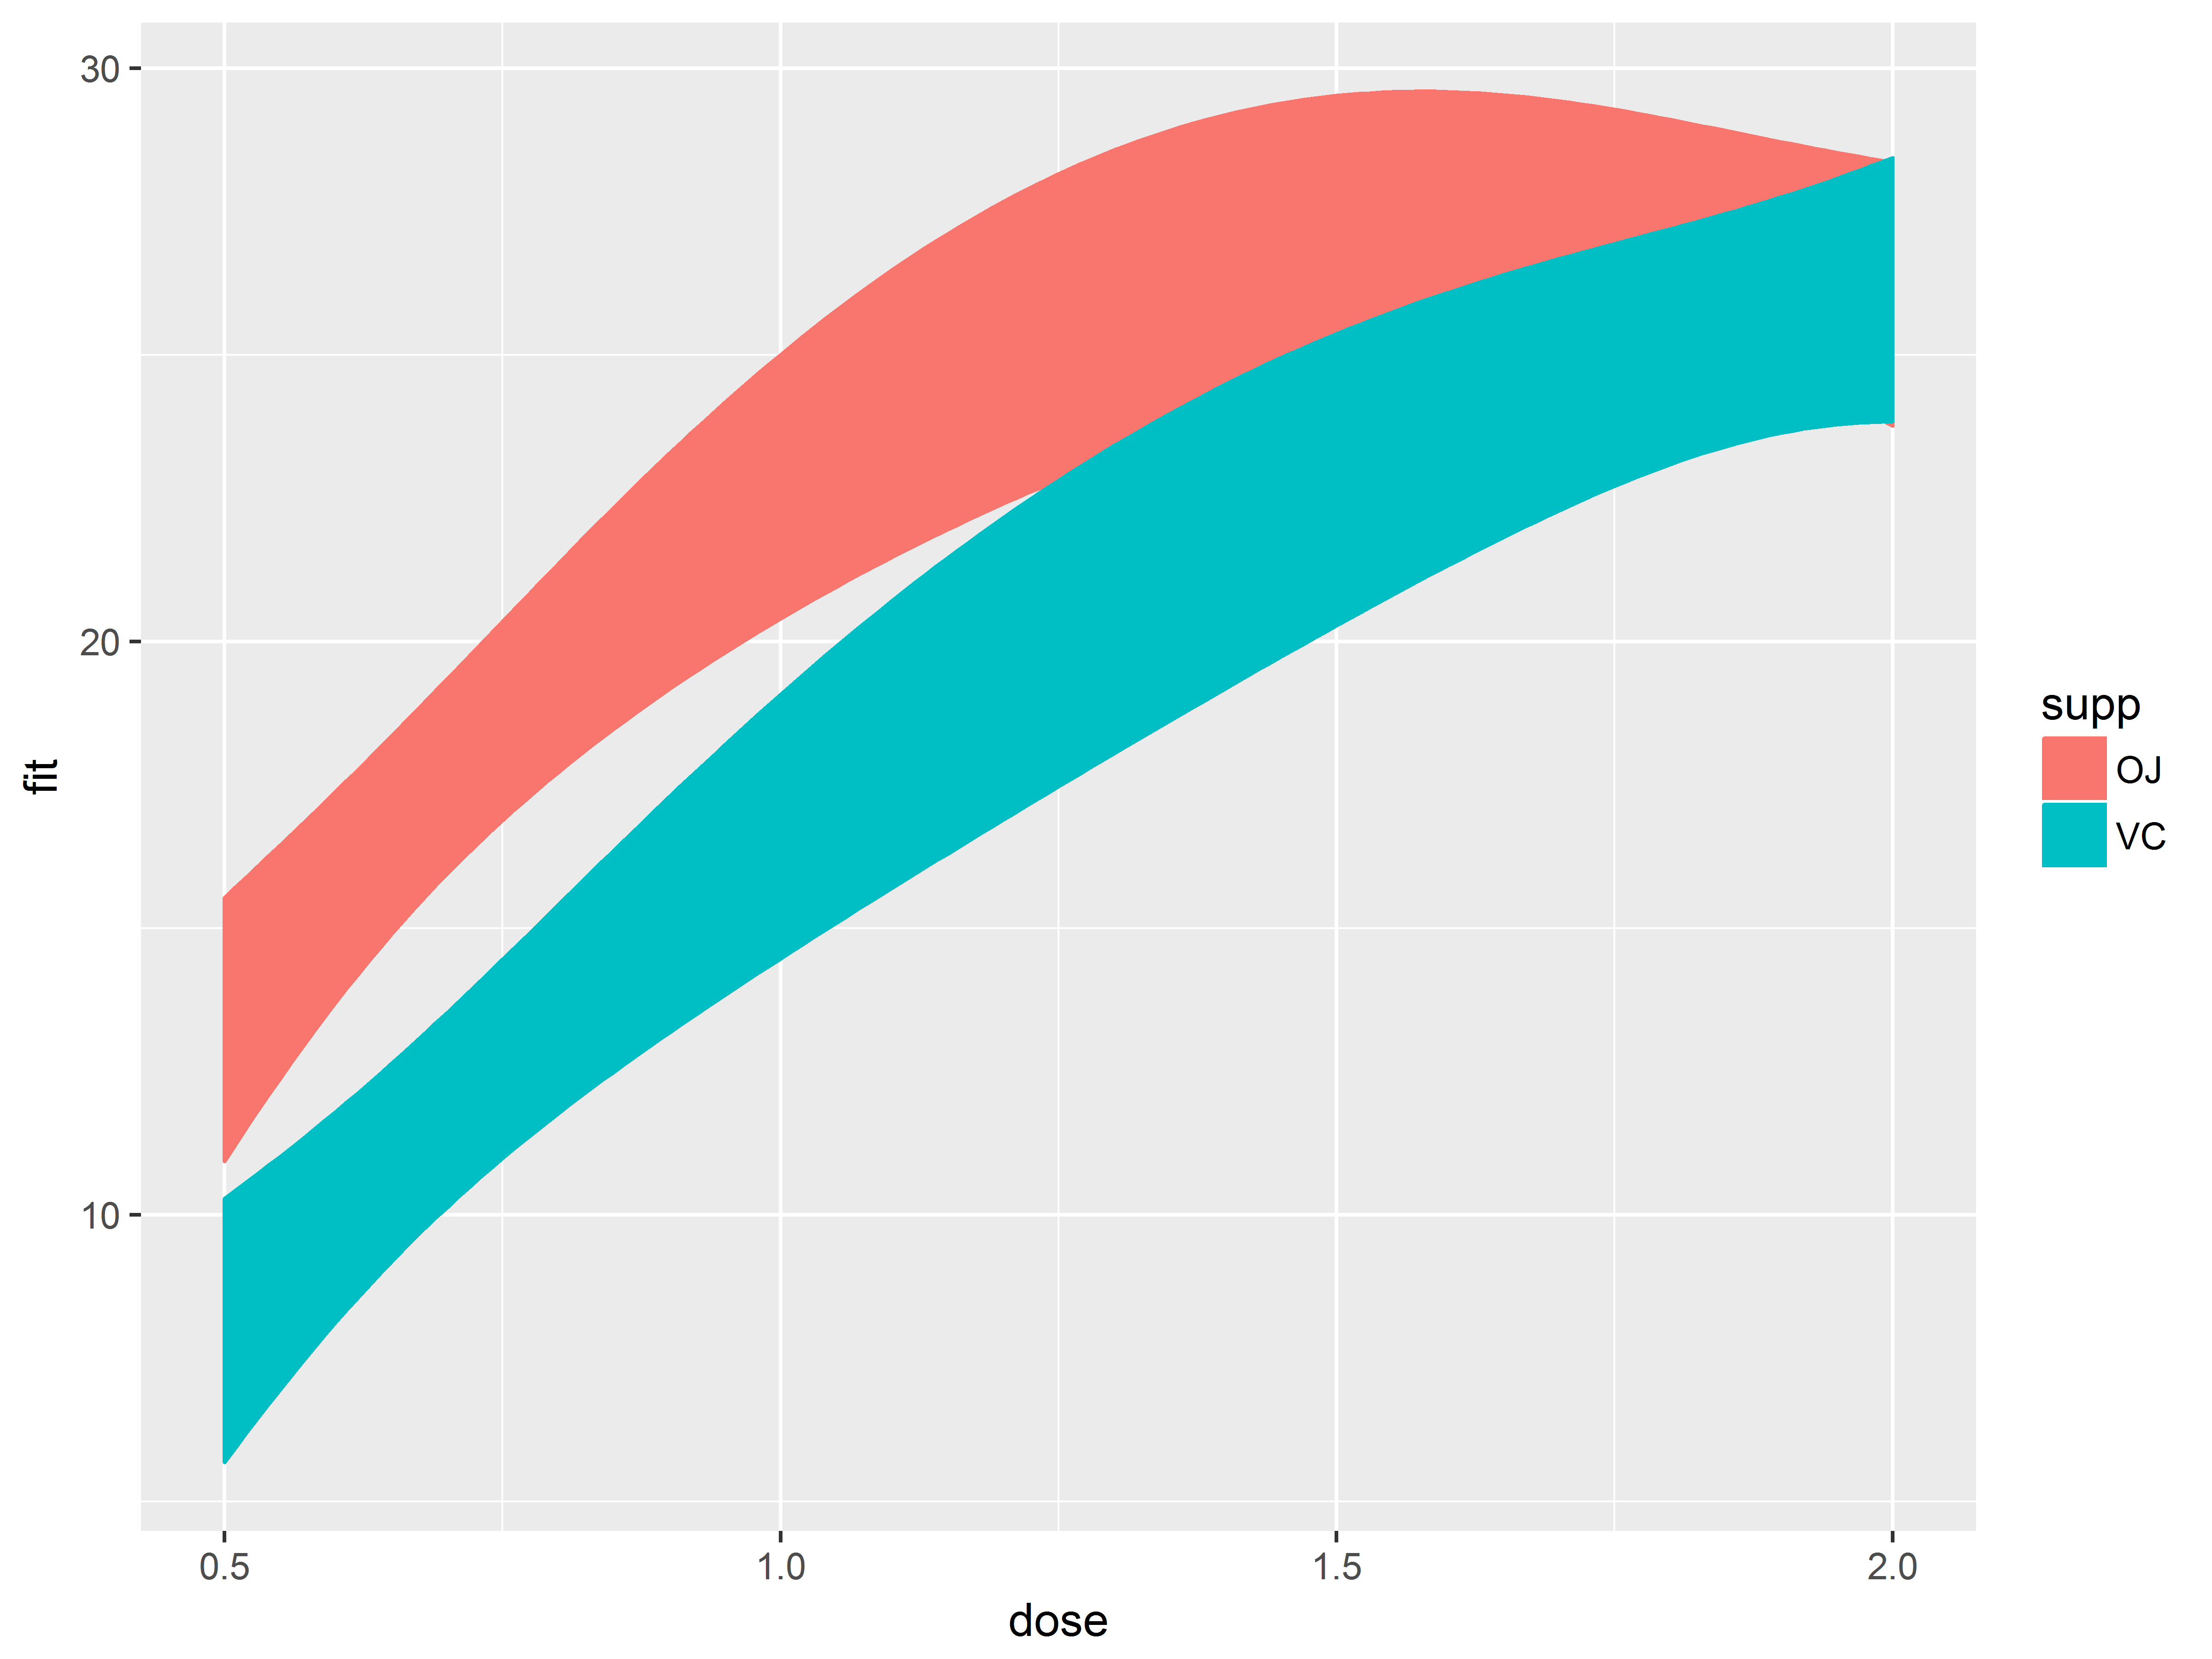 Fig 2.11a model predicted values with 95% CIs